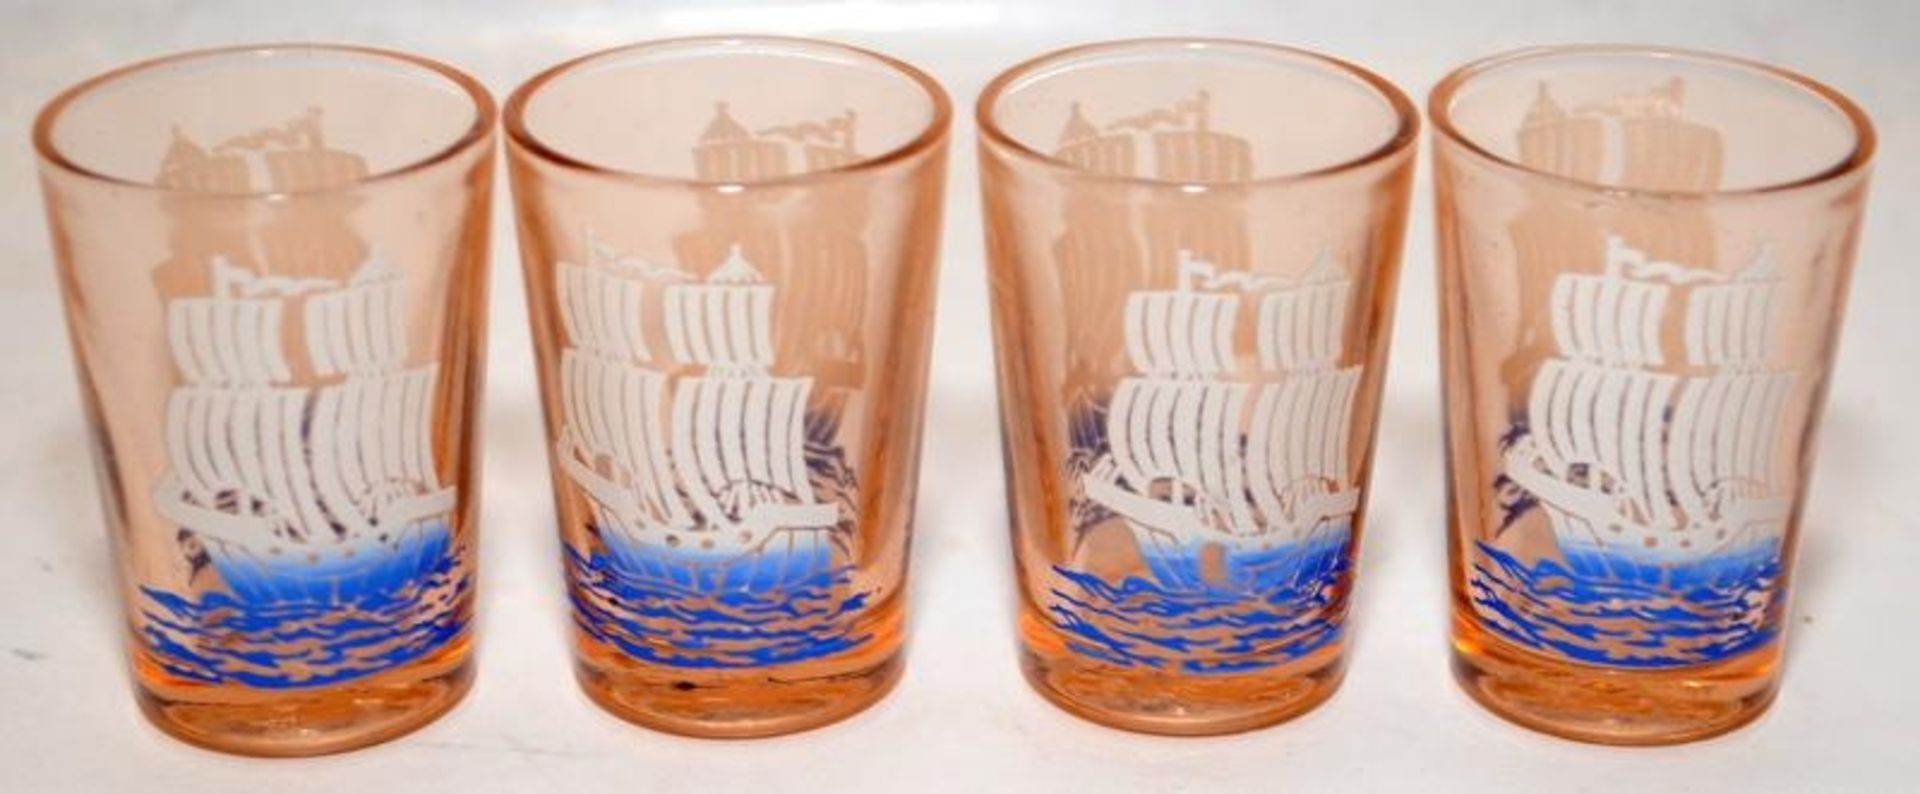 Vintage mid-century peach glass decanter featuring a ship c/w four shot glasses - Image 3 of 3